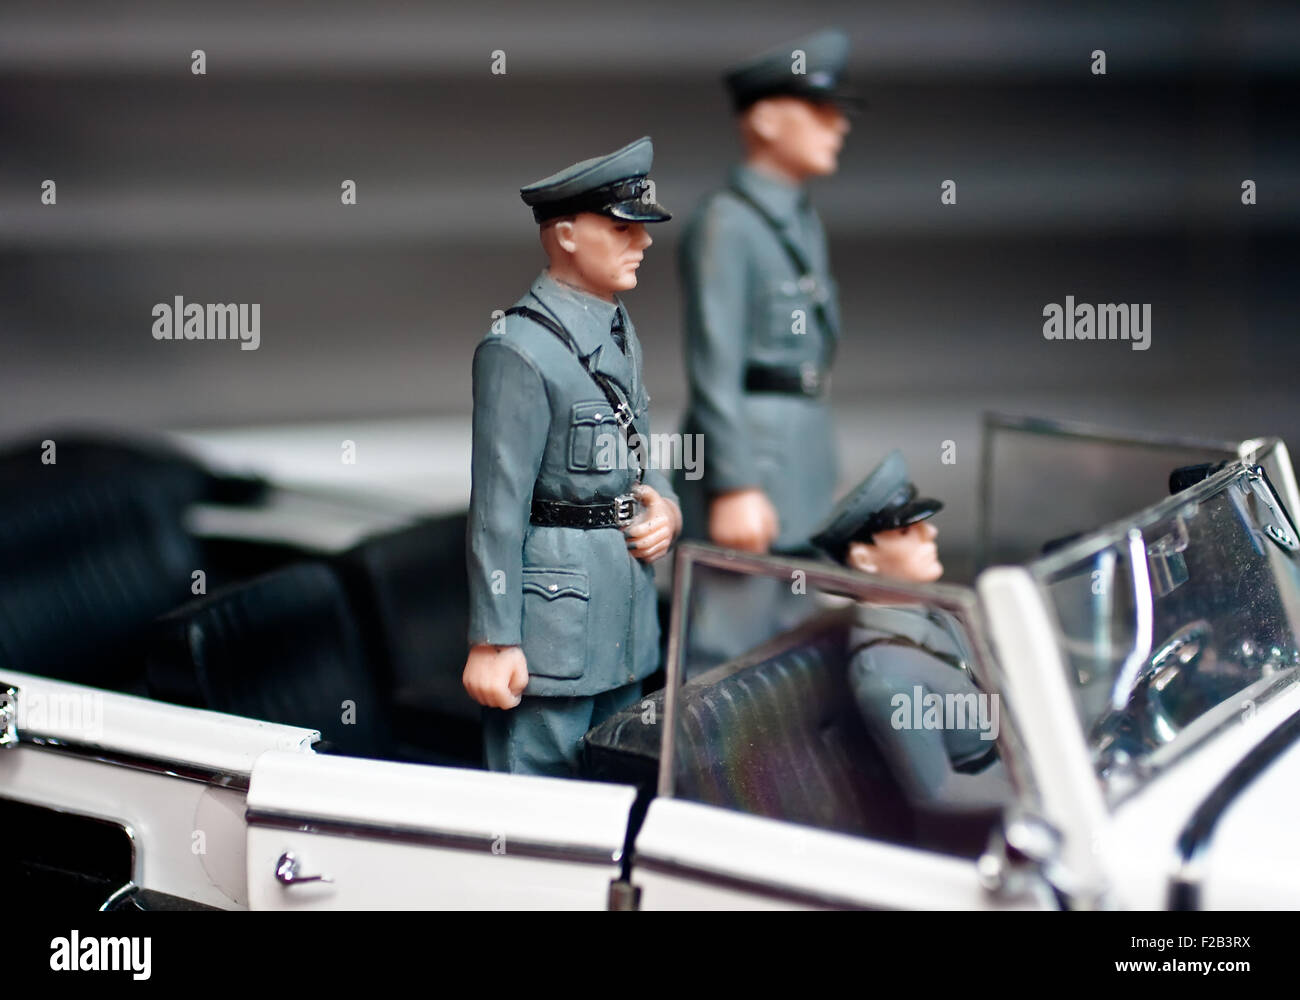 Toy soldiers on a car Stock Photo